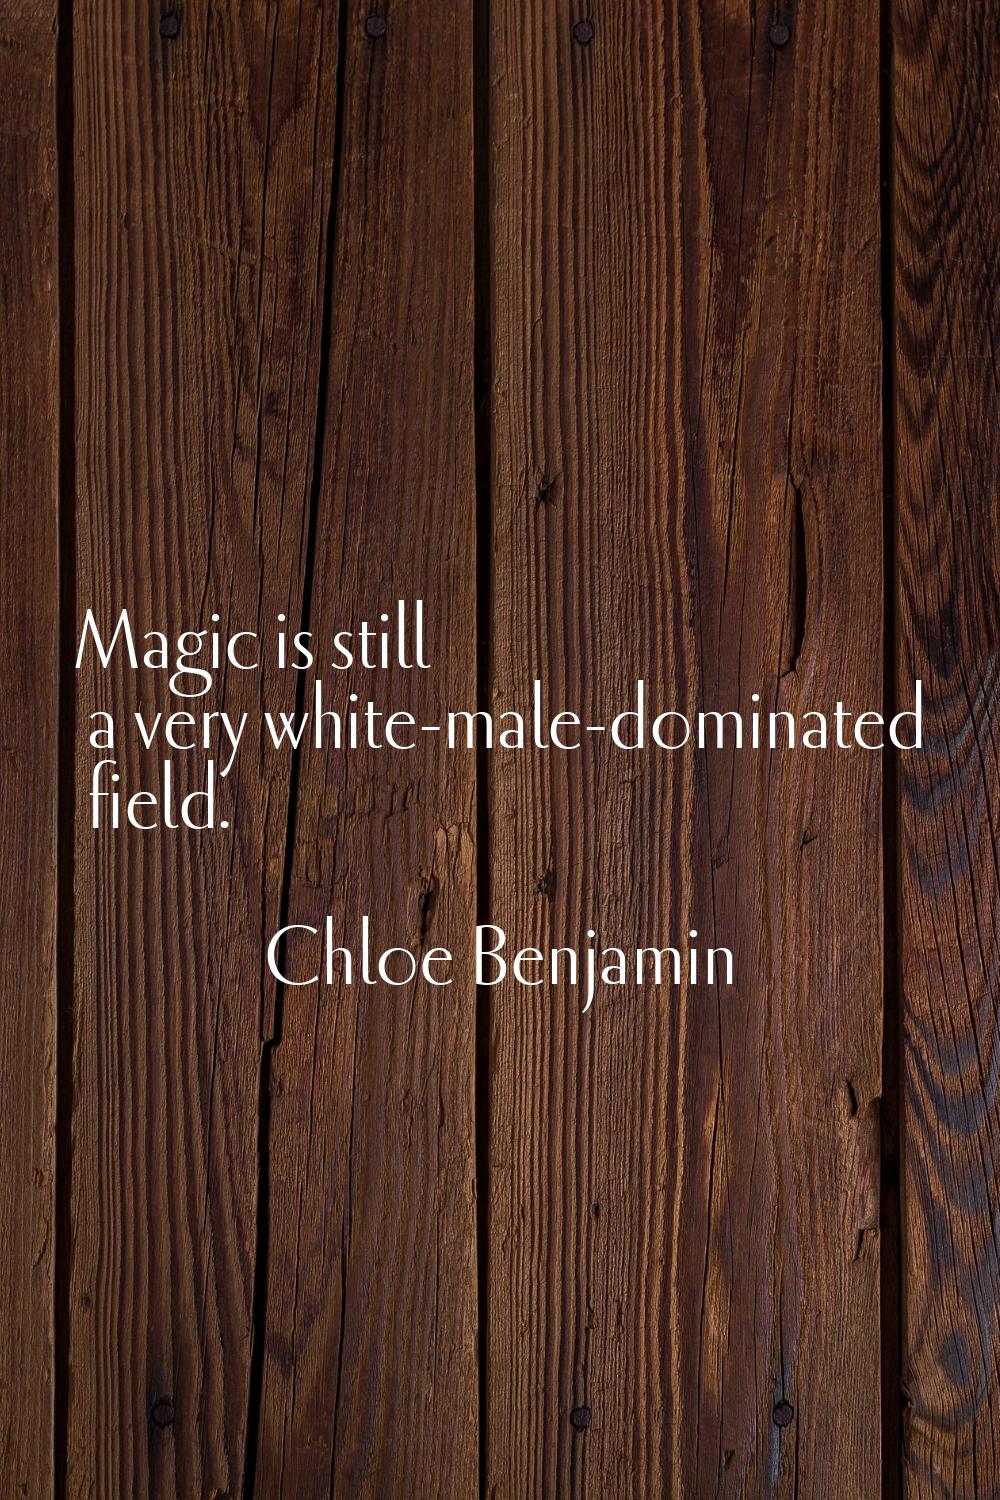 Magic is still a very white-male-dominated field.